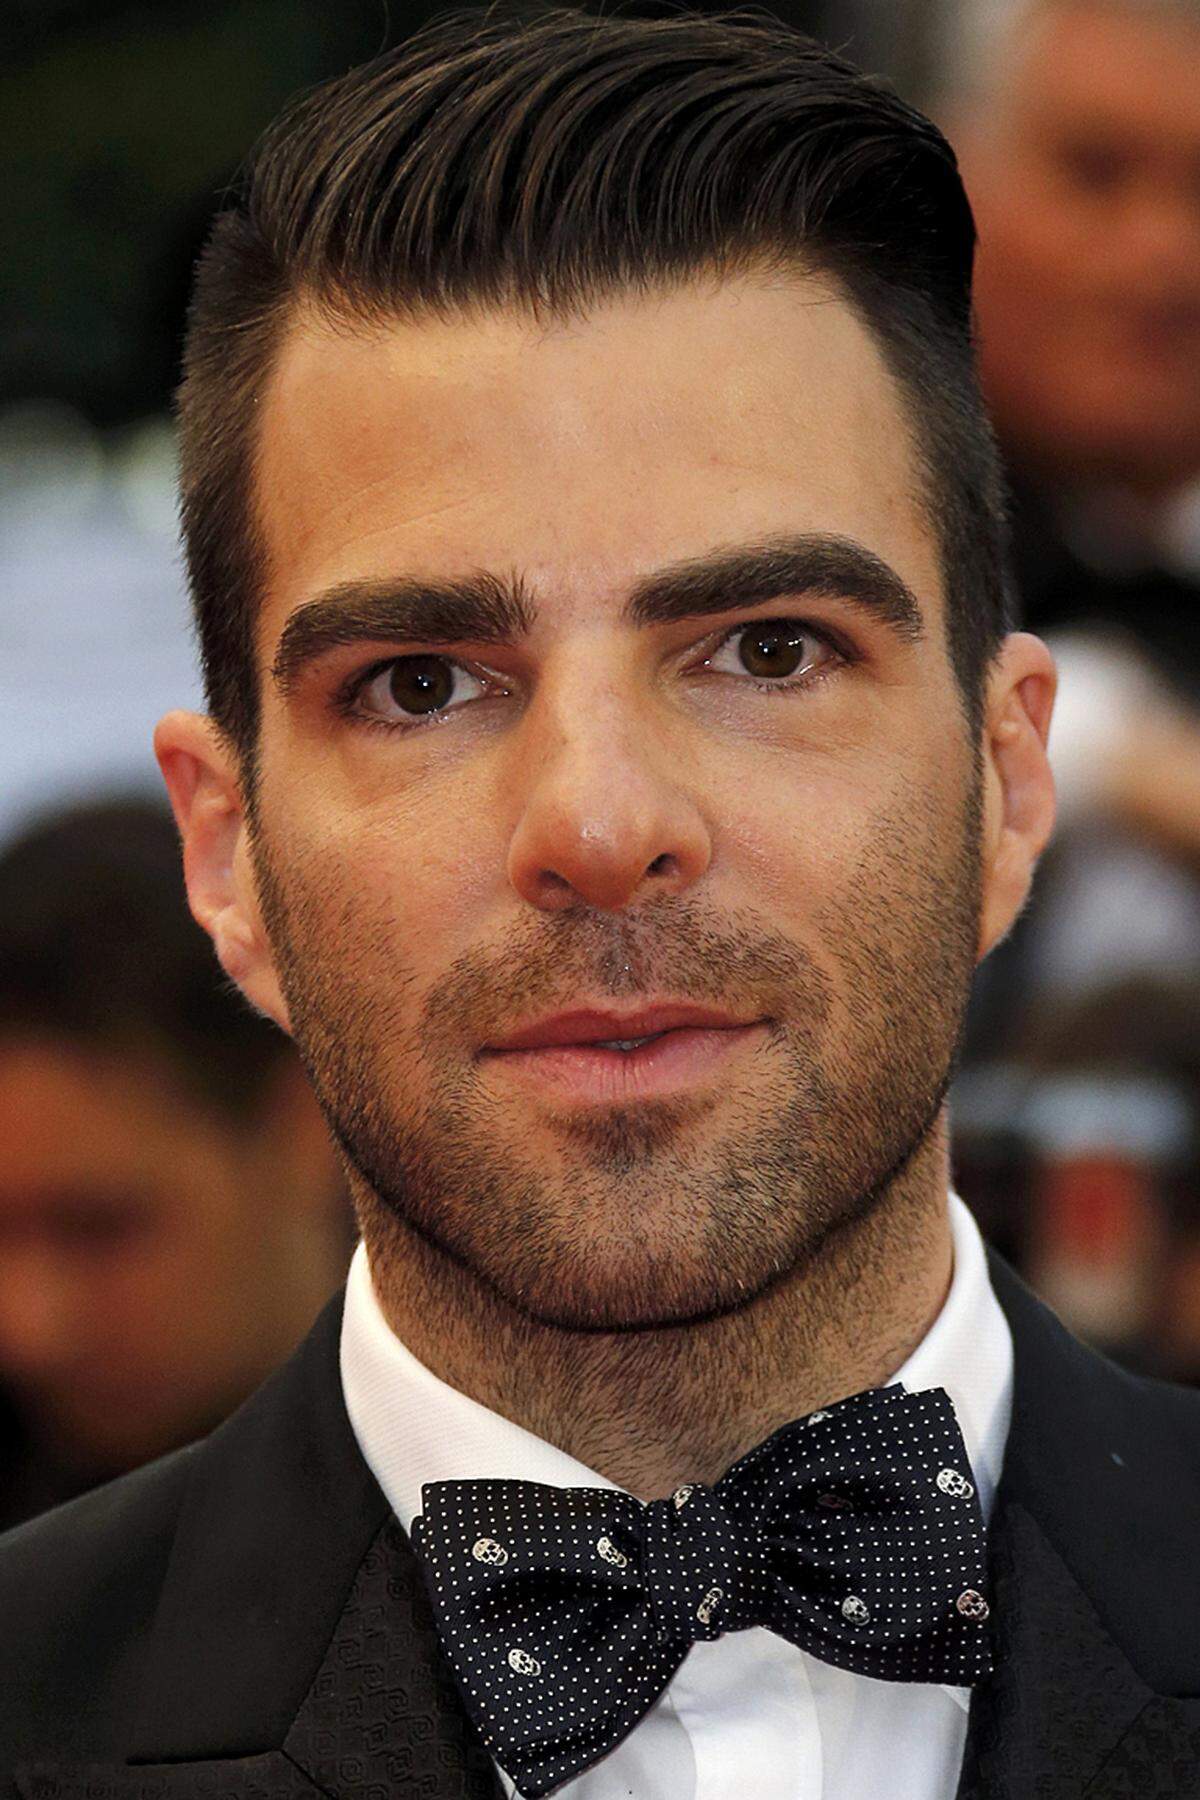 ... "Mr. Spock" Zachary Quinto in Schale.